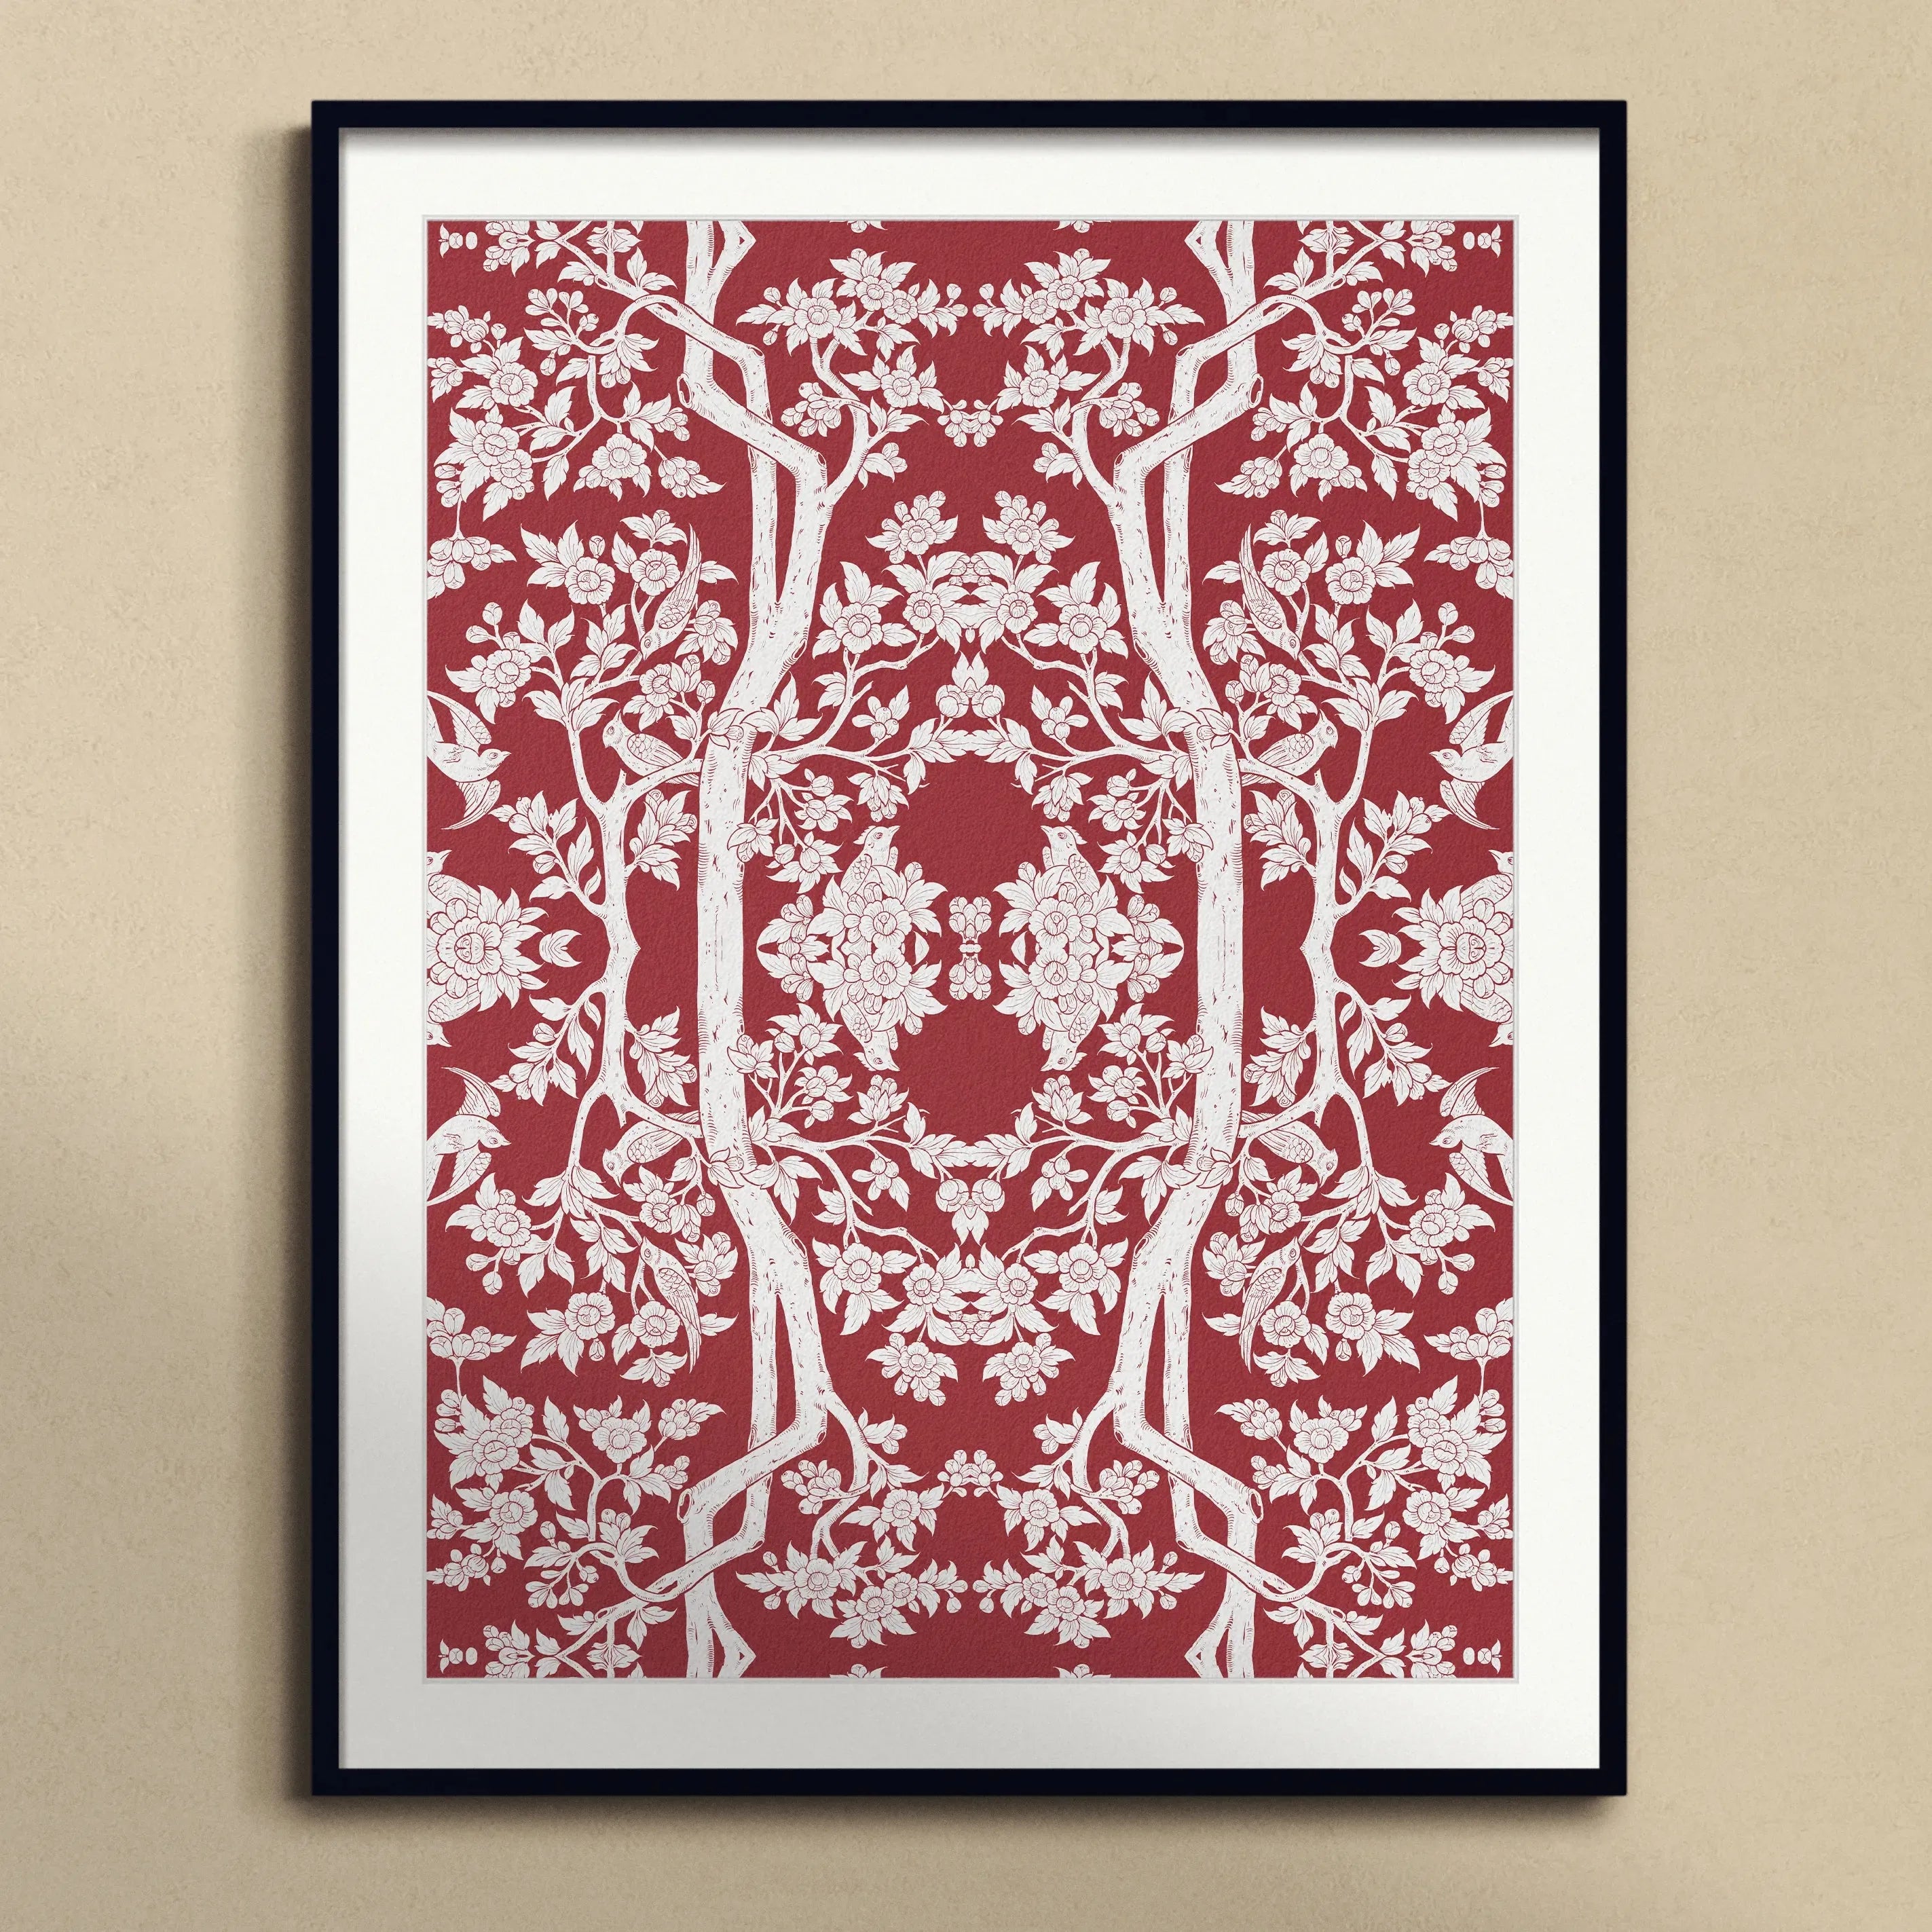 Aviary Red Framed & Mounted Print - Posters Prints & Visual Artwork - Aesthetic Art